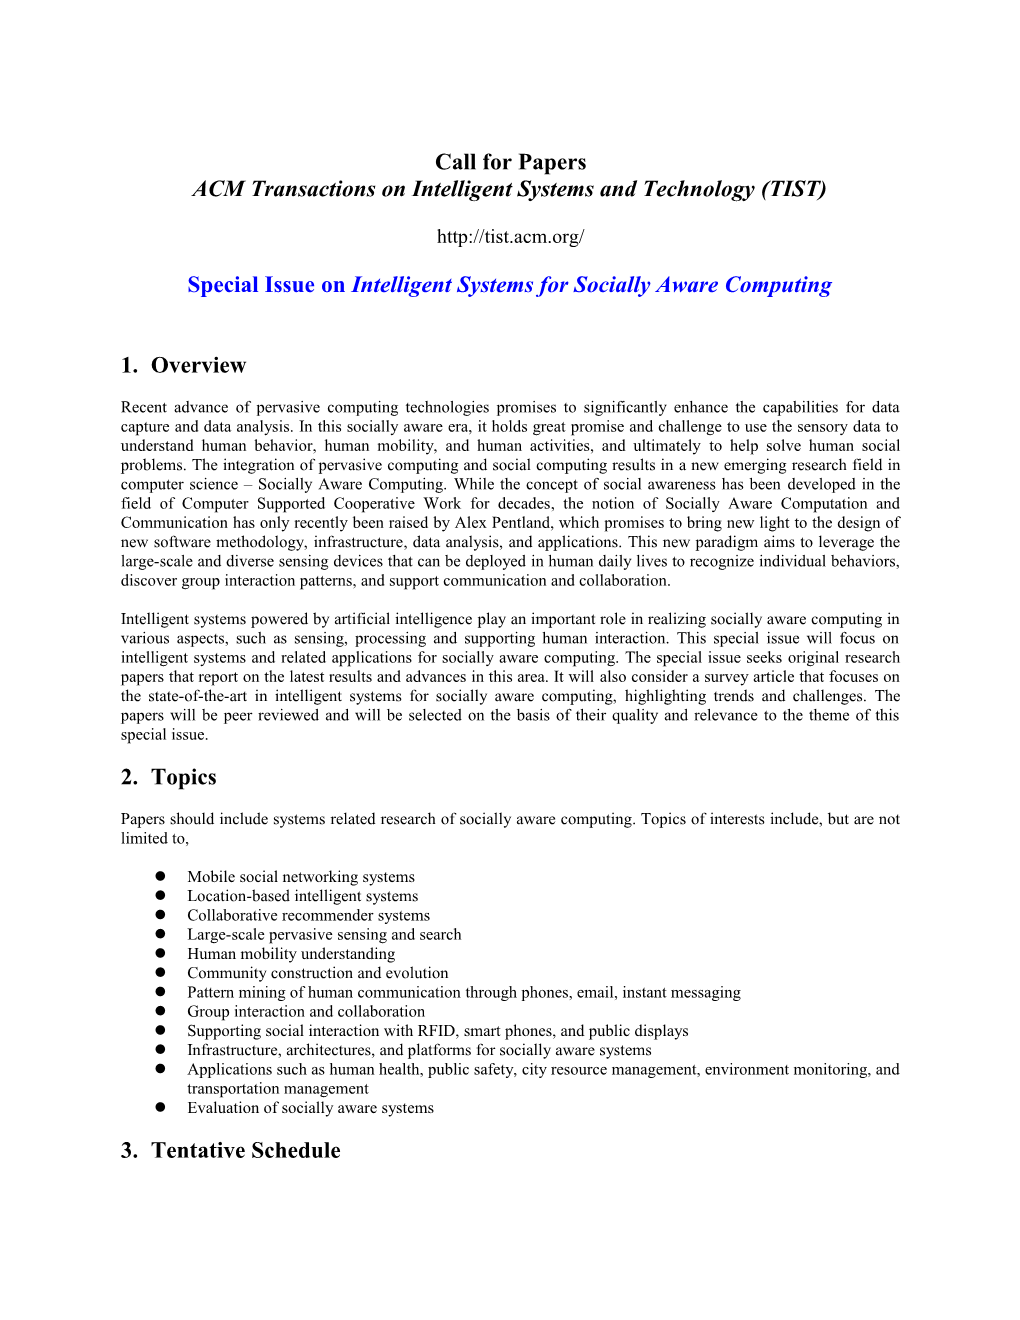 Special Issue Proposal for the IEEE Communications Magazine